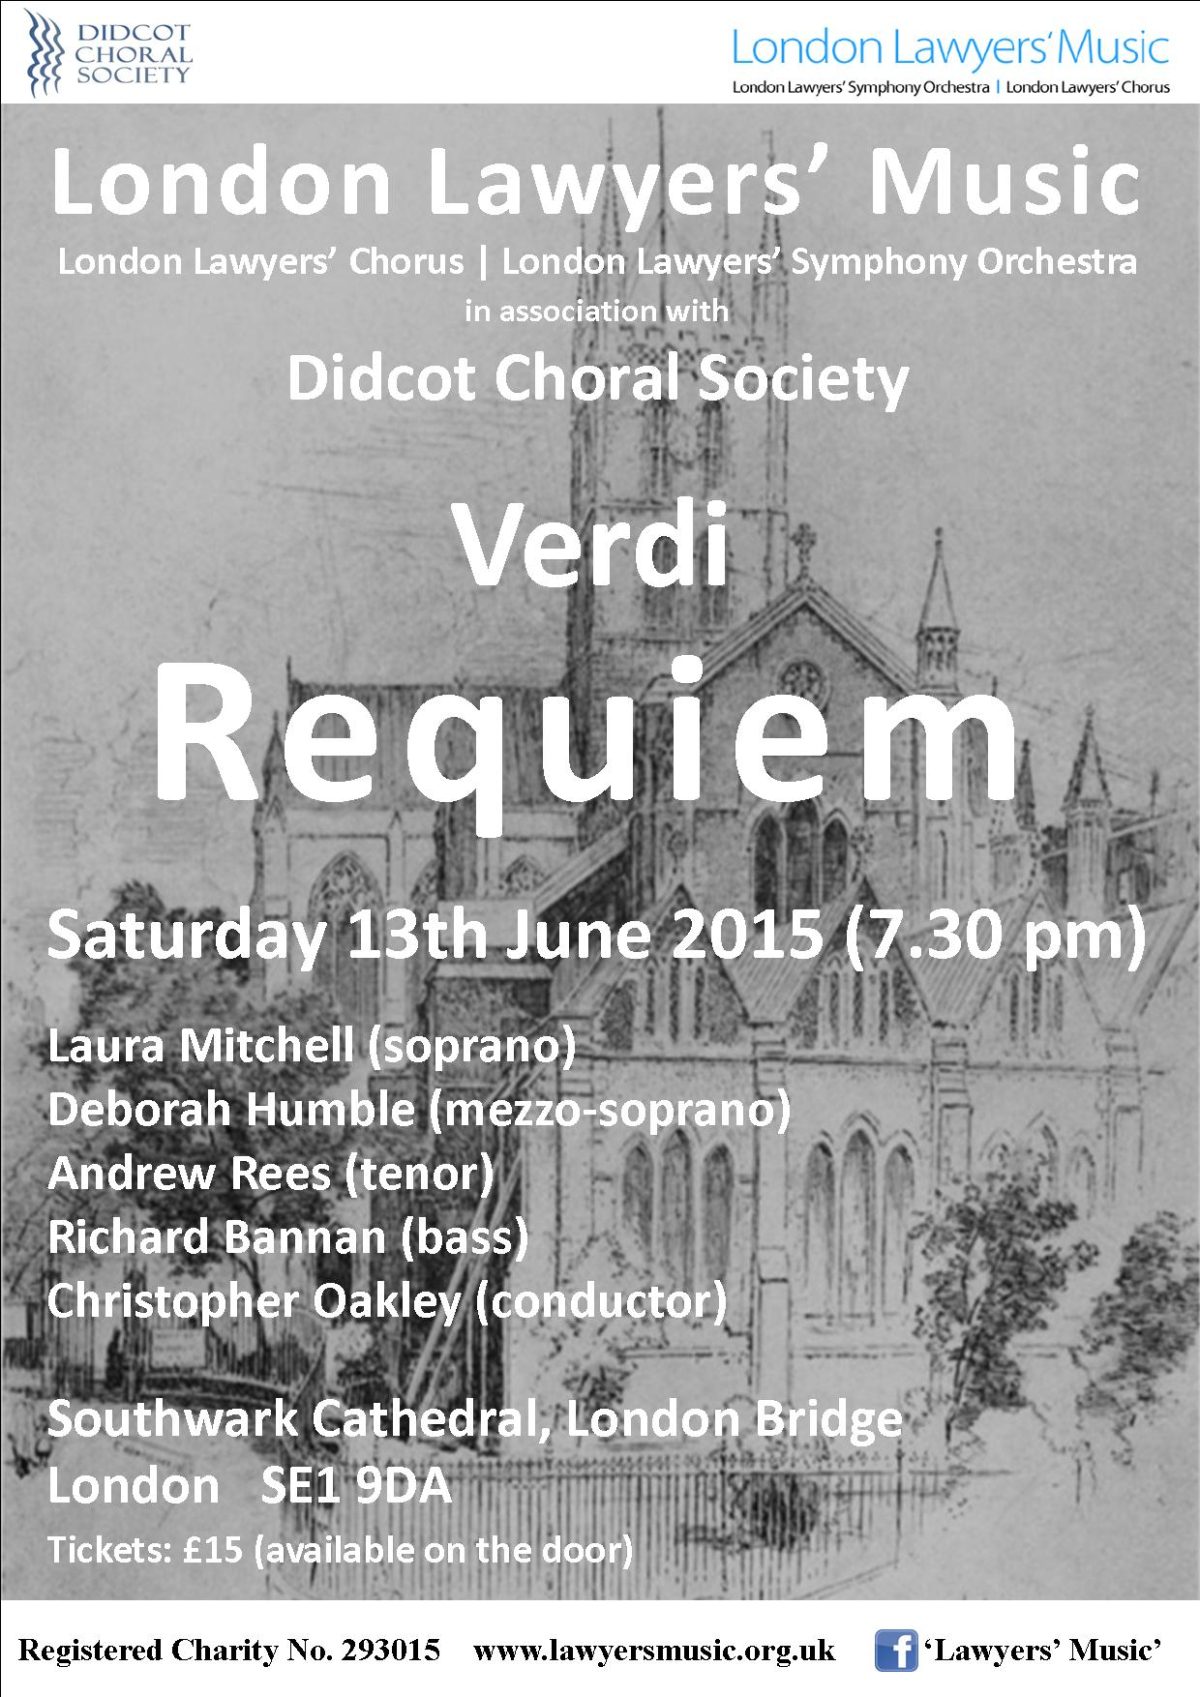 Verdi Requiem (with the London Lawyers' Chorus and Symphony Orchestra)